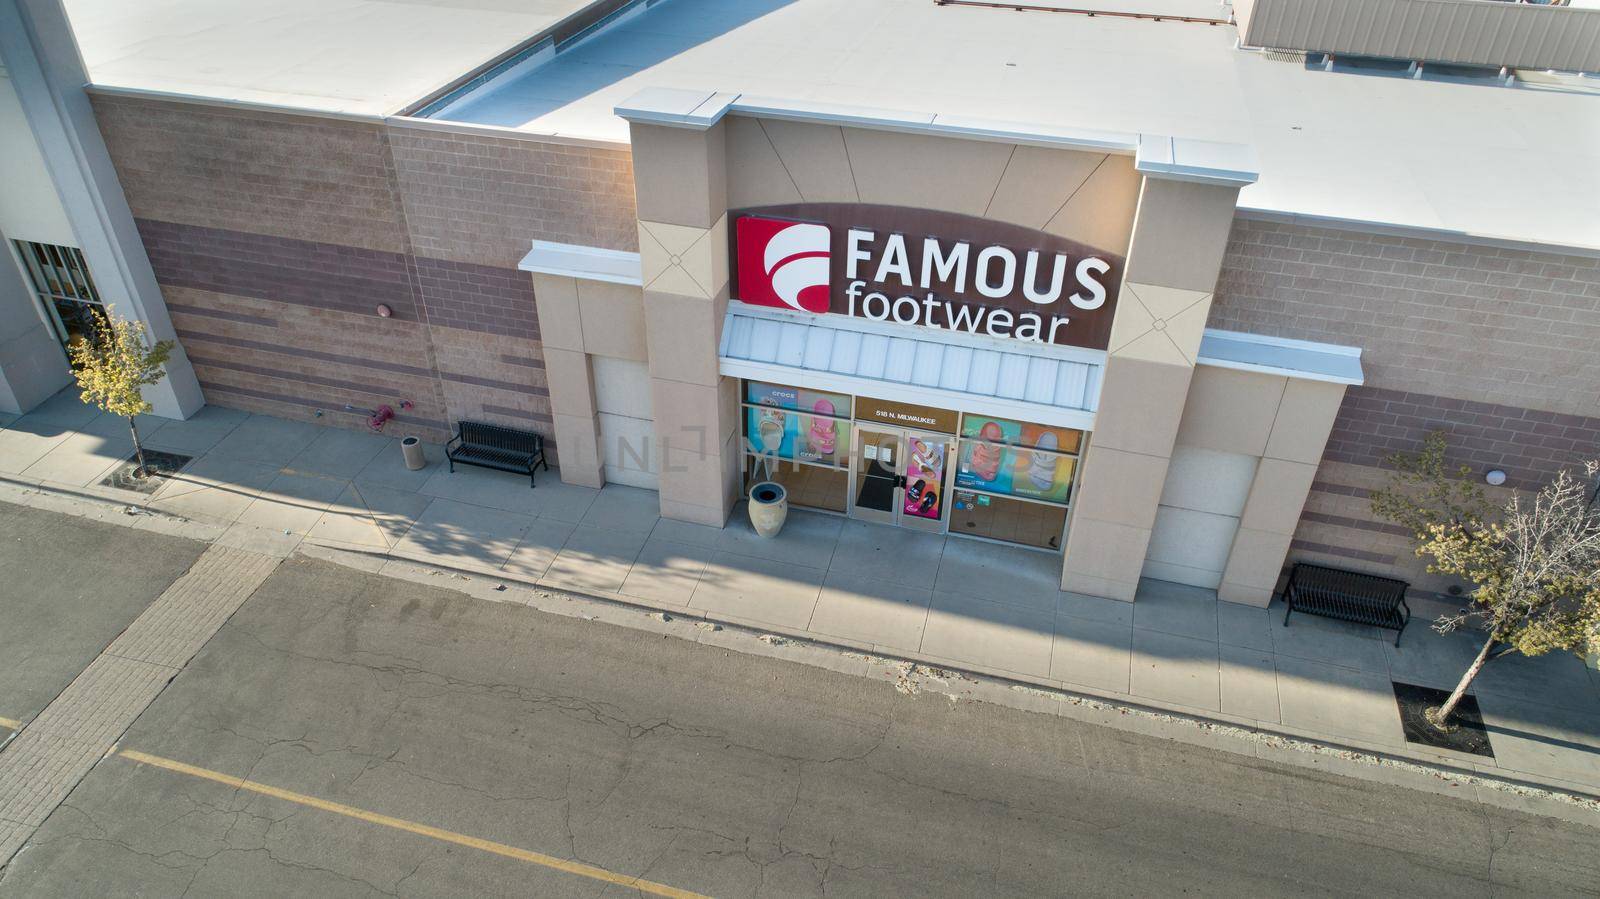 BOISE, IDAHO - APRIL 20, 2021: Aerial view outside of the retail chain Famous Footware